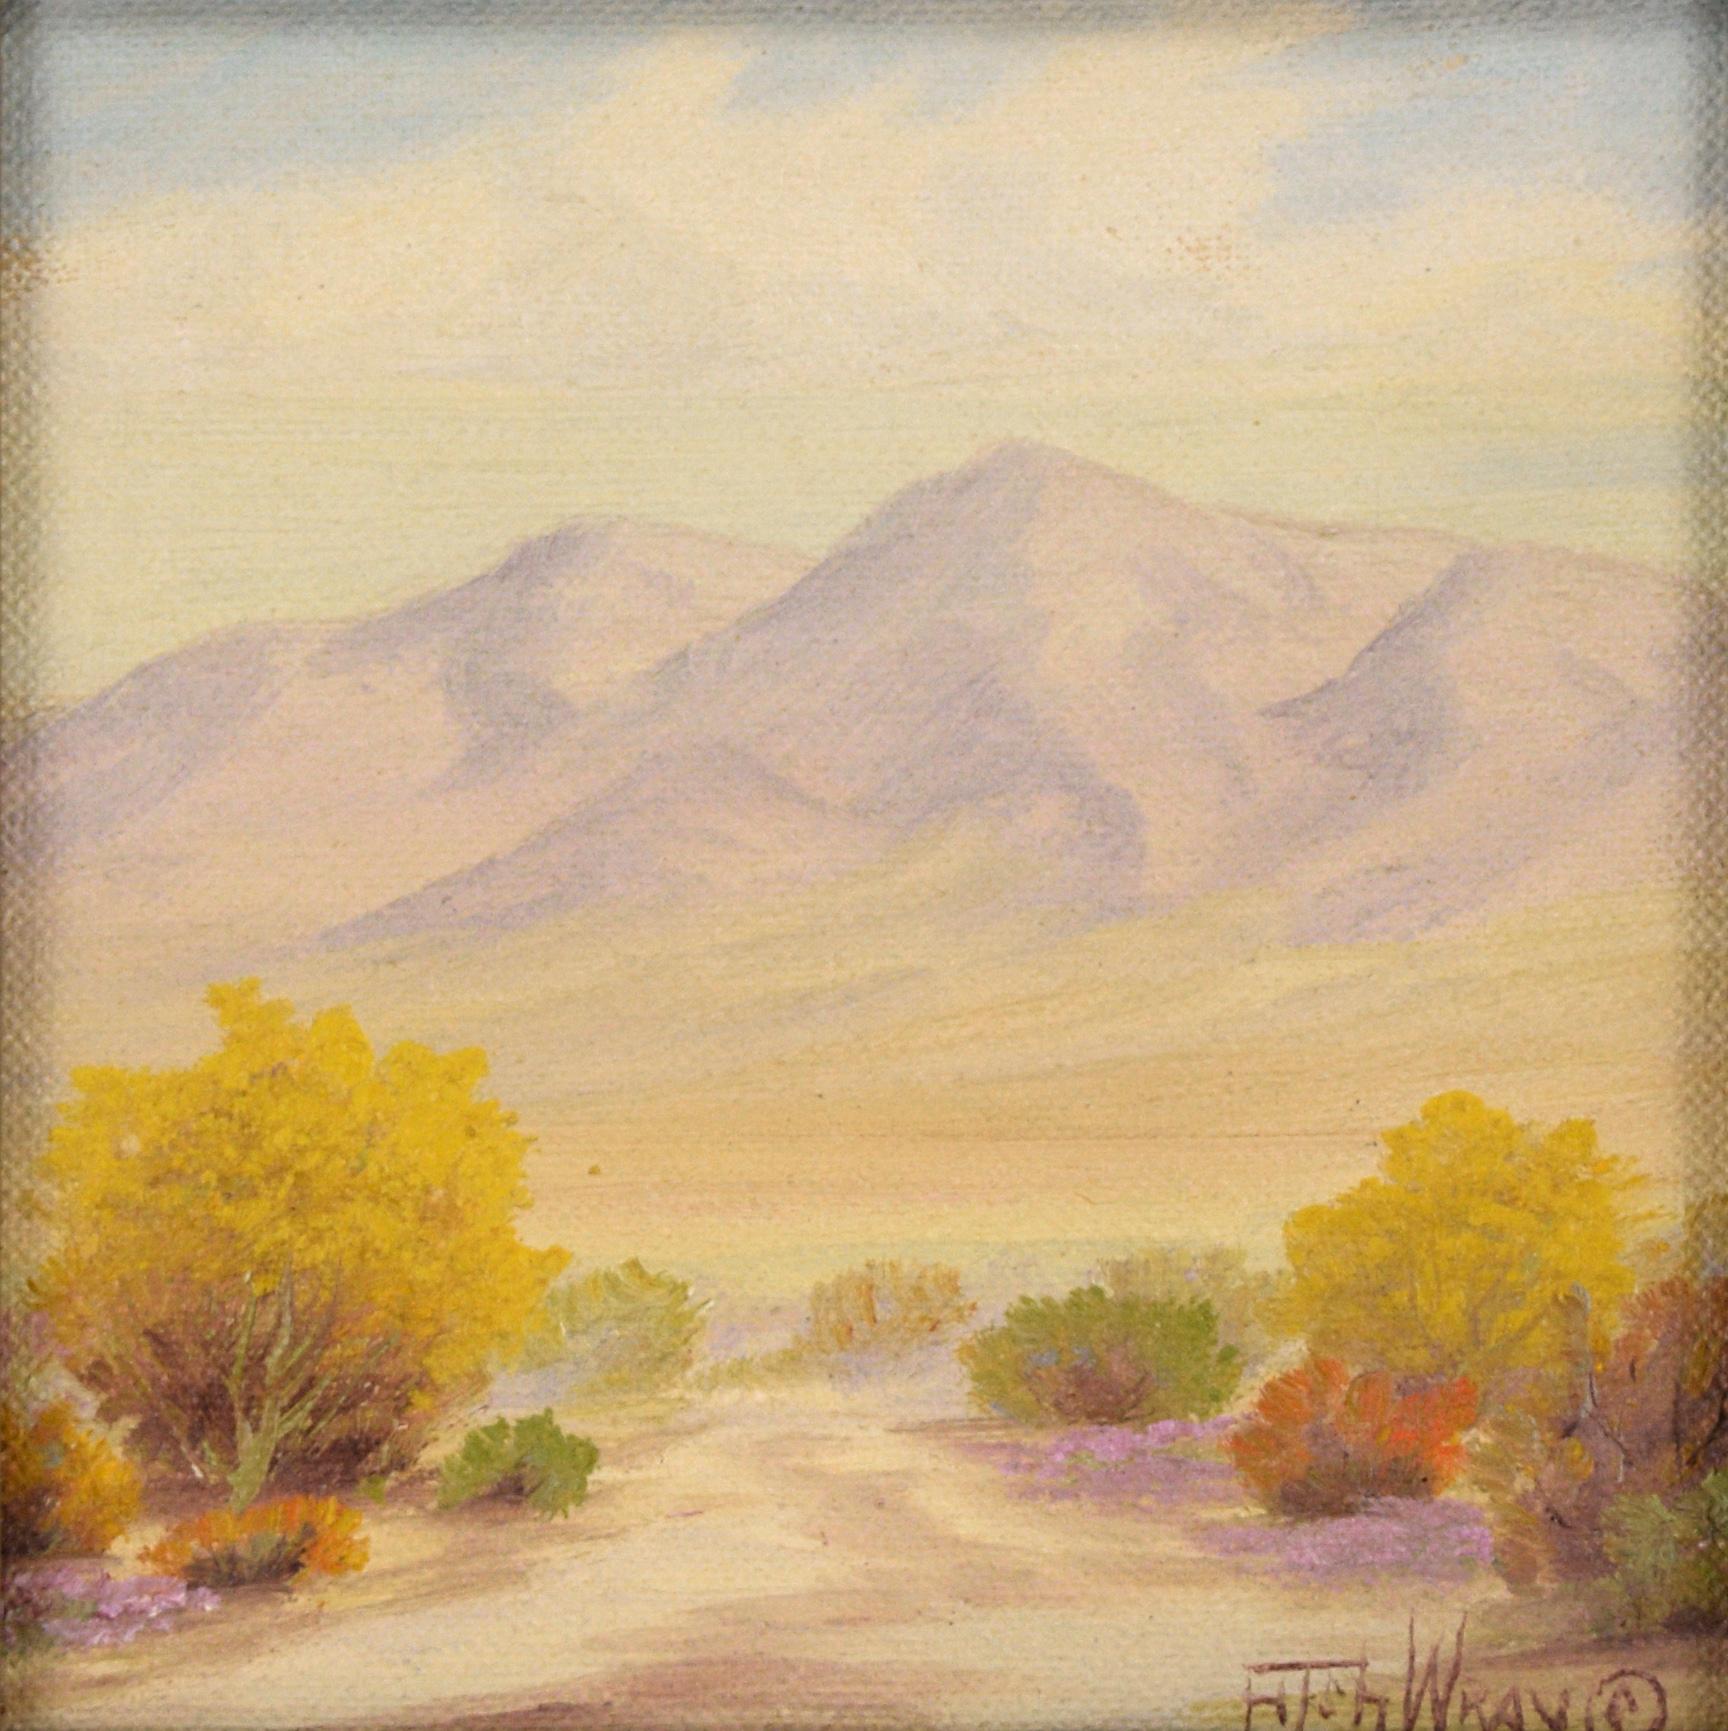 Miniature Desert Road Landscape - Painting by William Fitch Wray